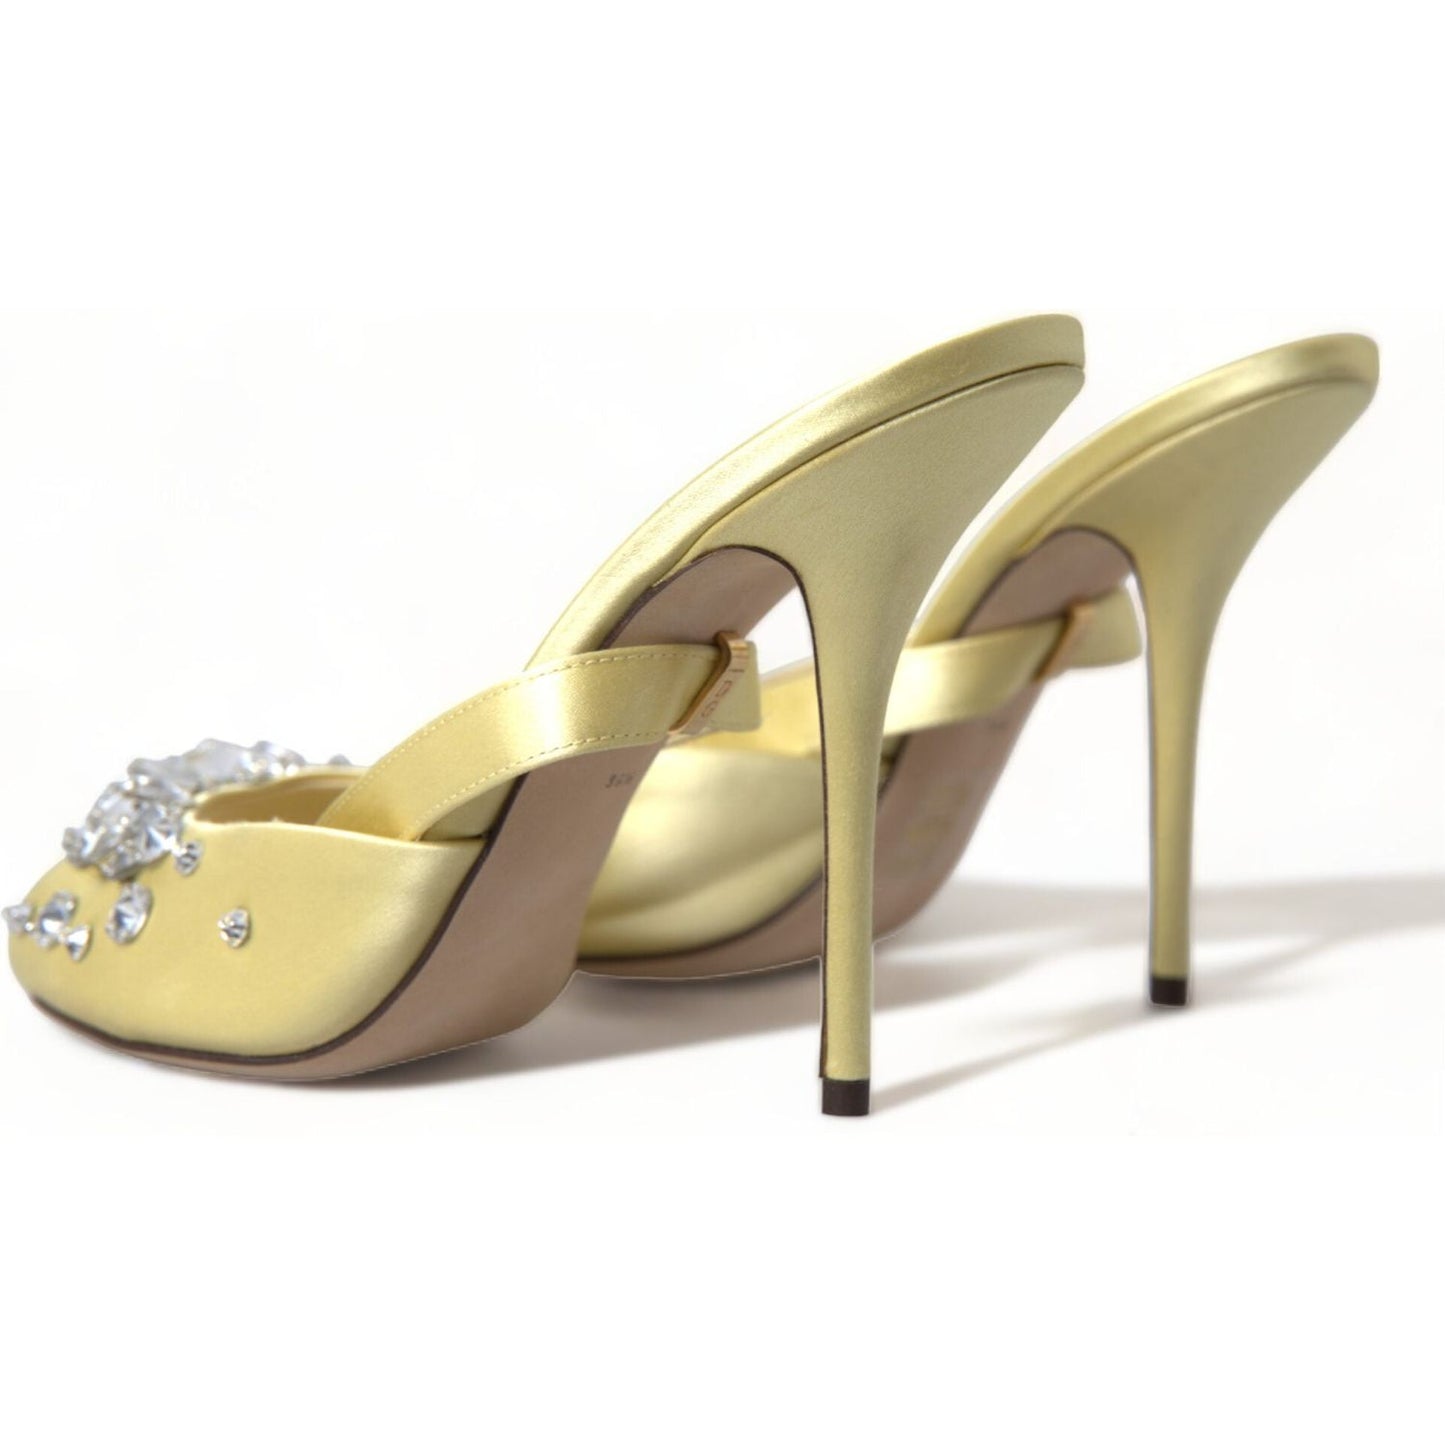 Dolce & Gabbana Crystal Embellished Silk Sandals yellow-satin-crystal-mary-janes-sandals